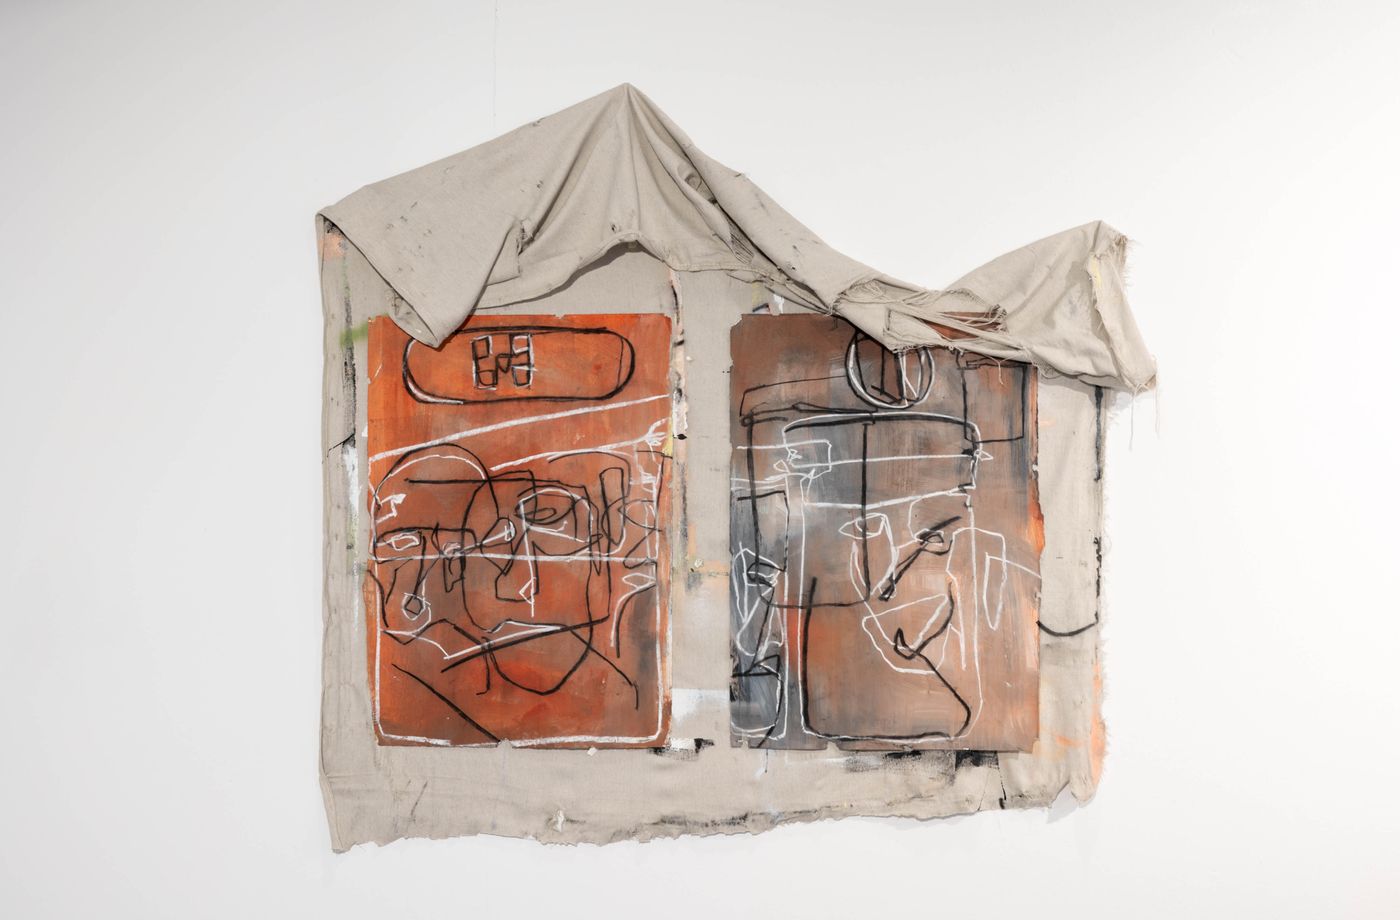 Bottle Me Up, 2009 - 2022. Iodine, saliva, charcoal, acrylic, canvas, paper, on drywall; 44 x 57 in. Photo: Allison Minto.